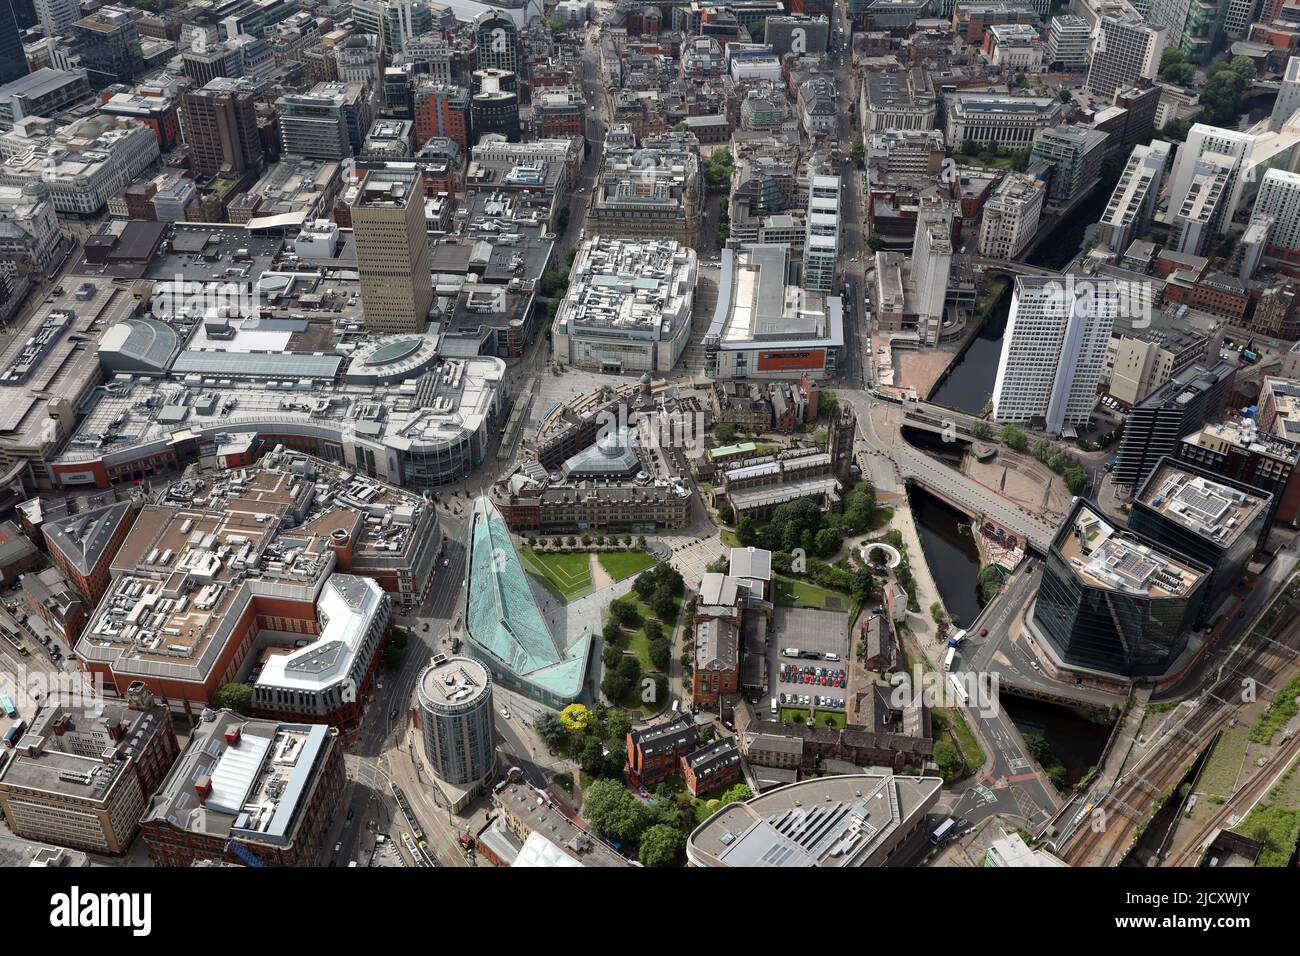 aerial view of Manchester city centre: Cathedral Gardens, National Football Museum (green bldg), Manchester Cathedral & Glade of Light memorial park Stock Photo